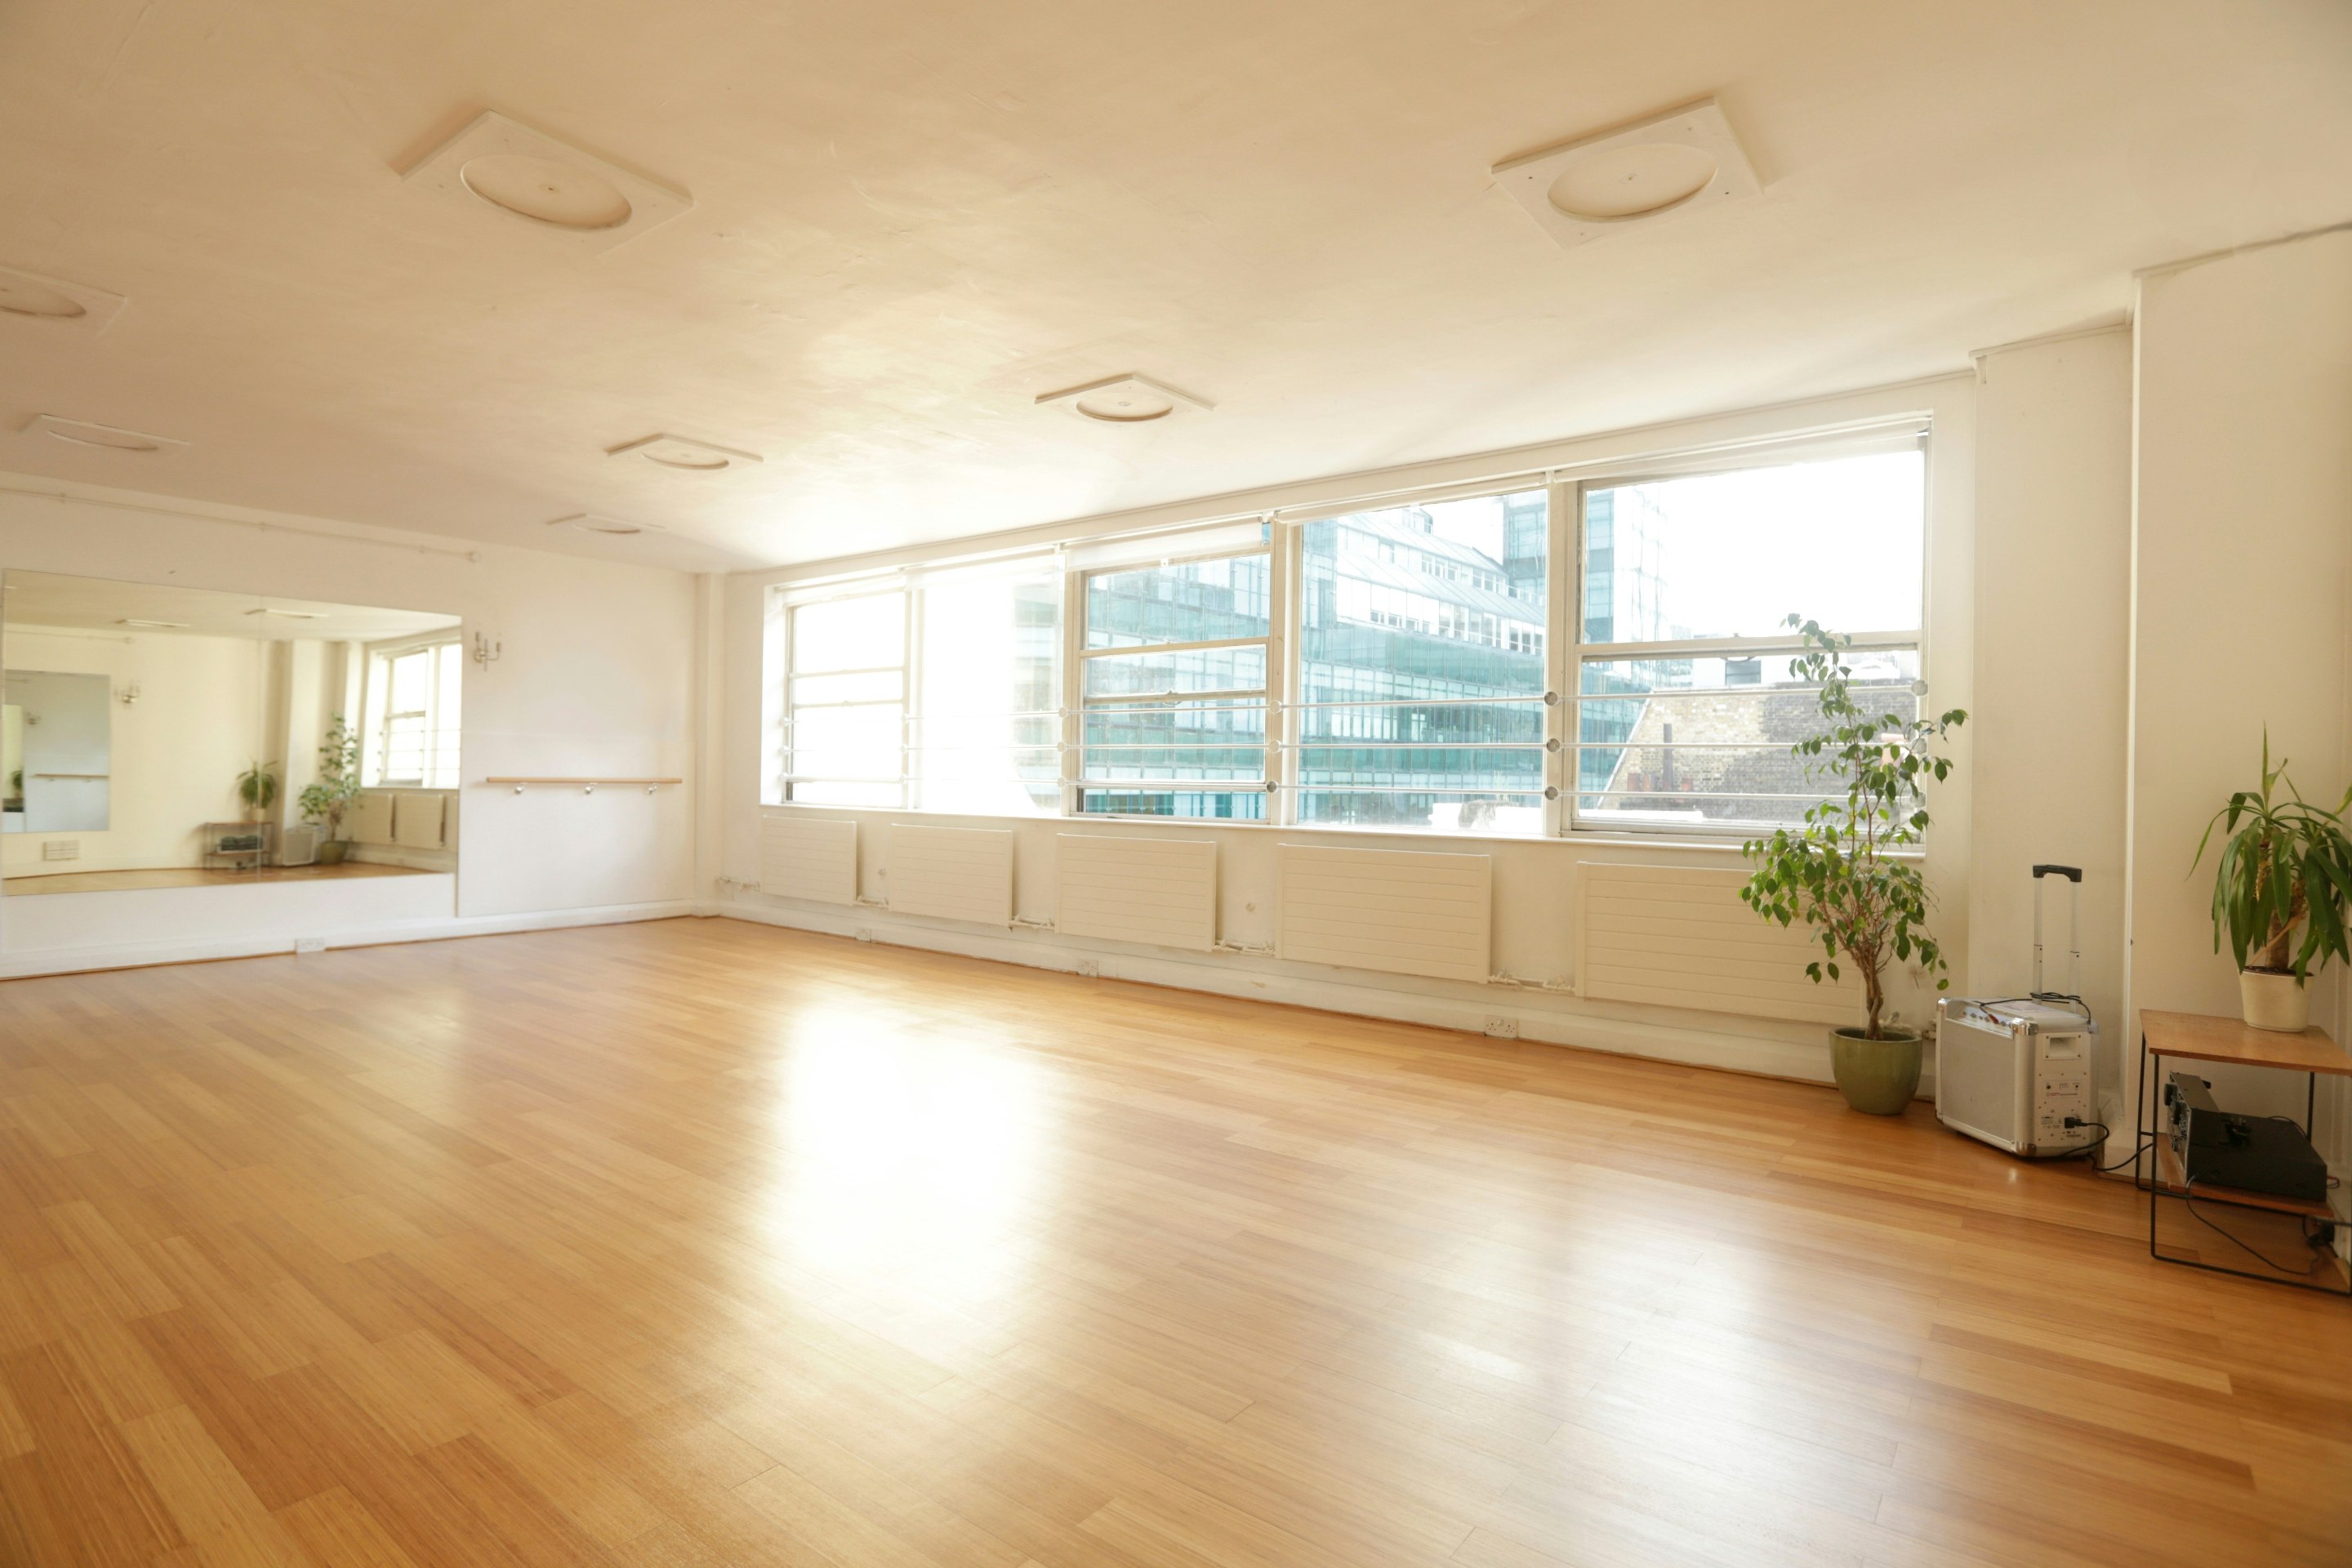 Audition Venues in London - London Rehearsal Space - Liverpool Street / Moorgate